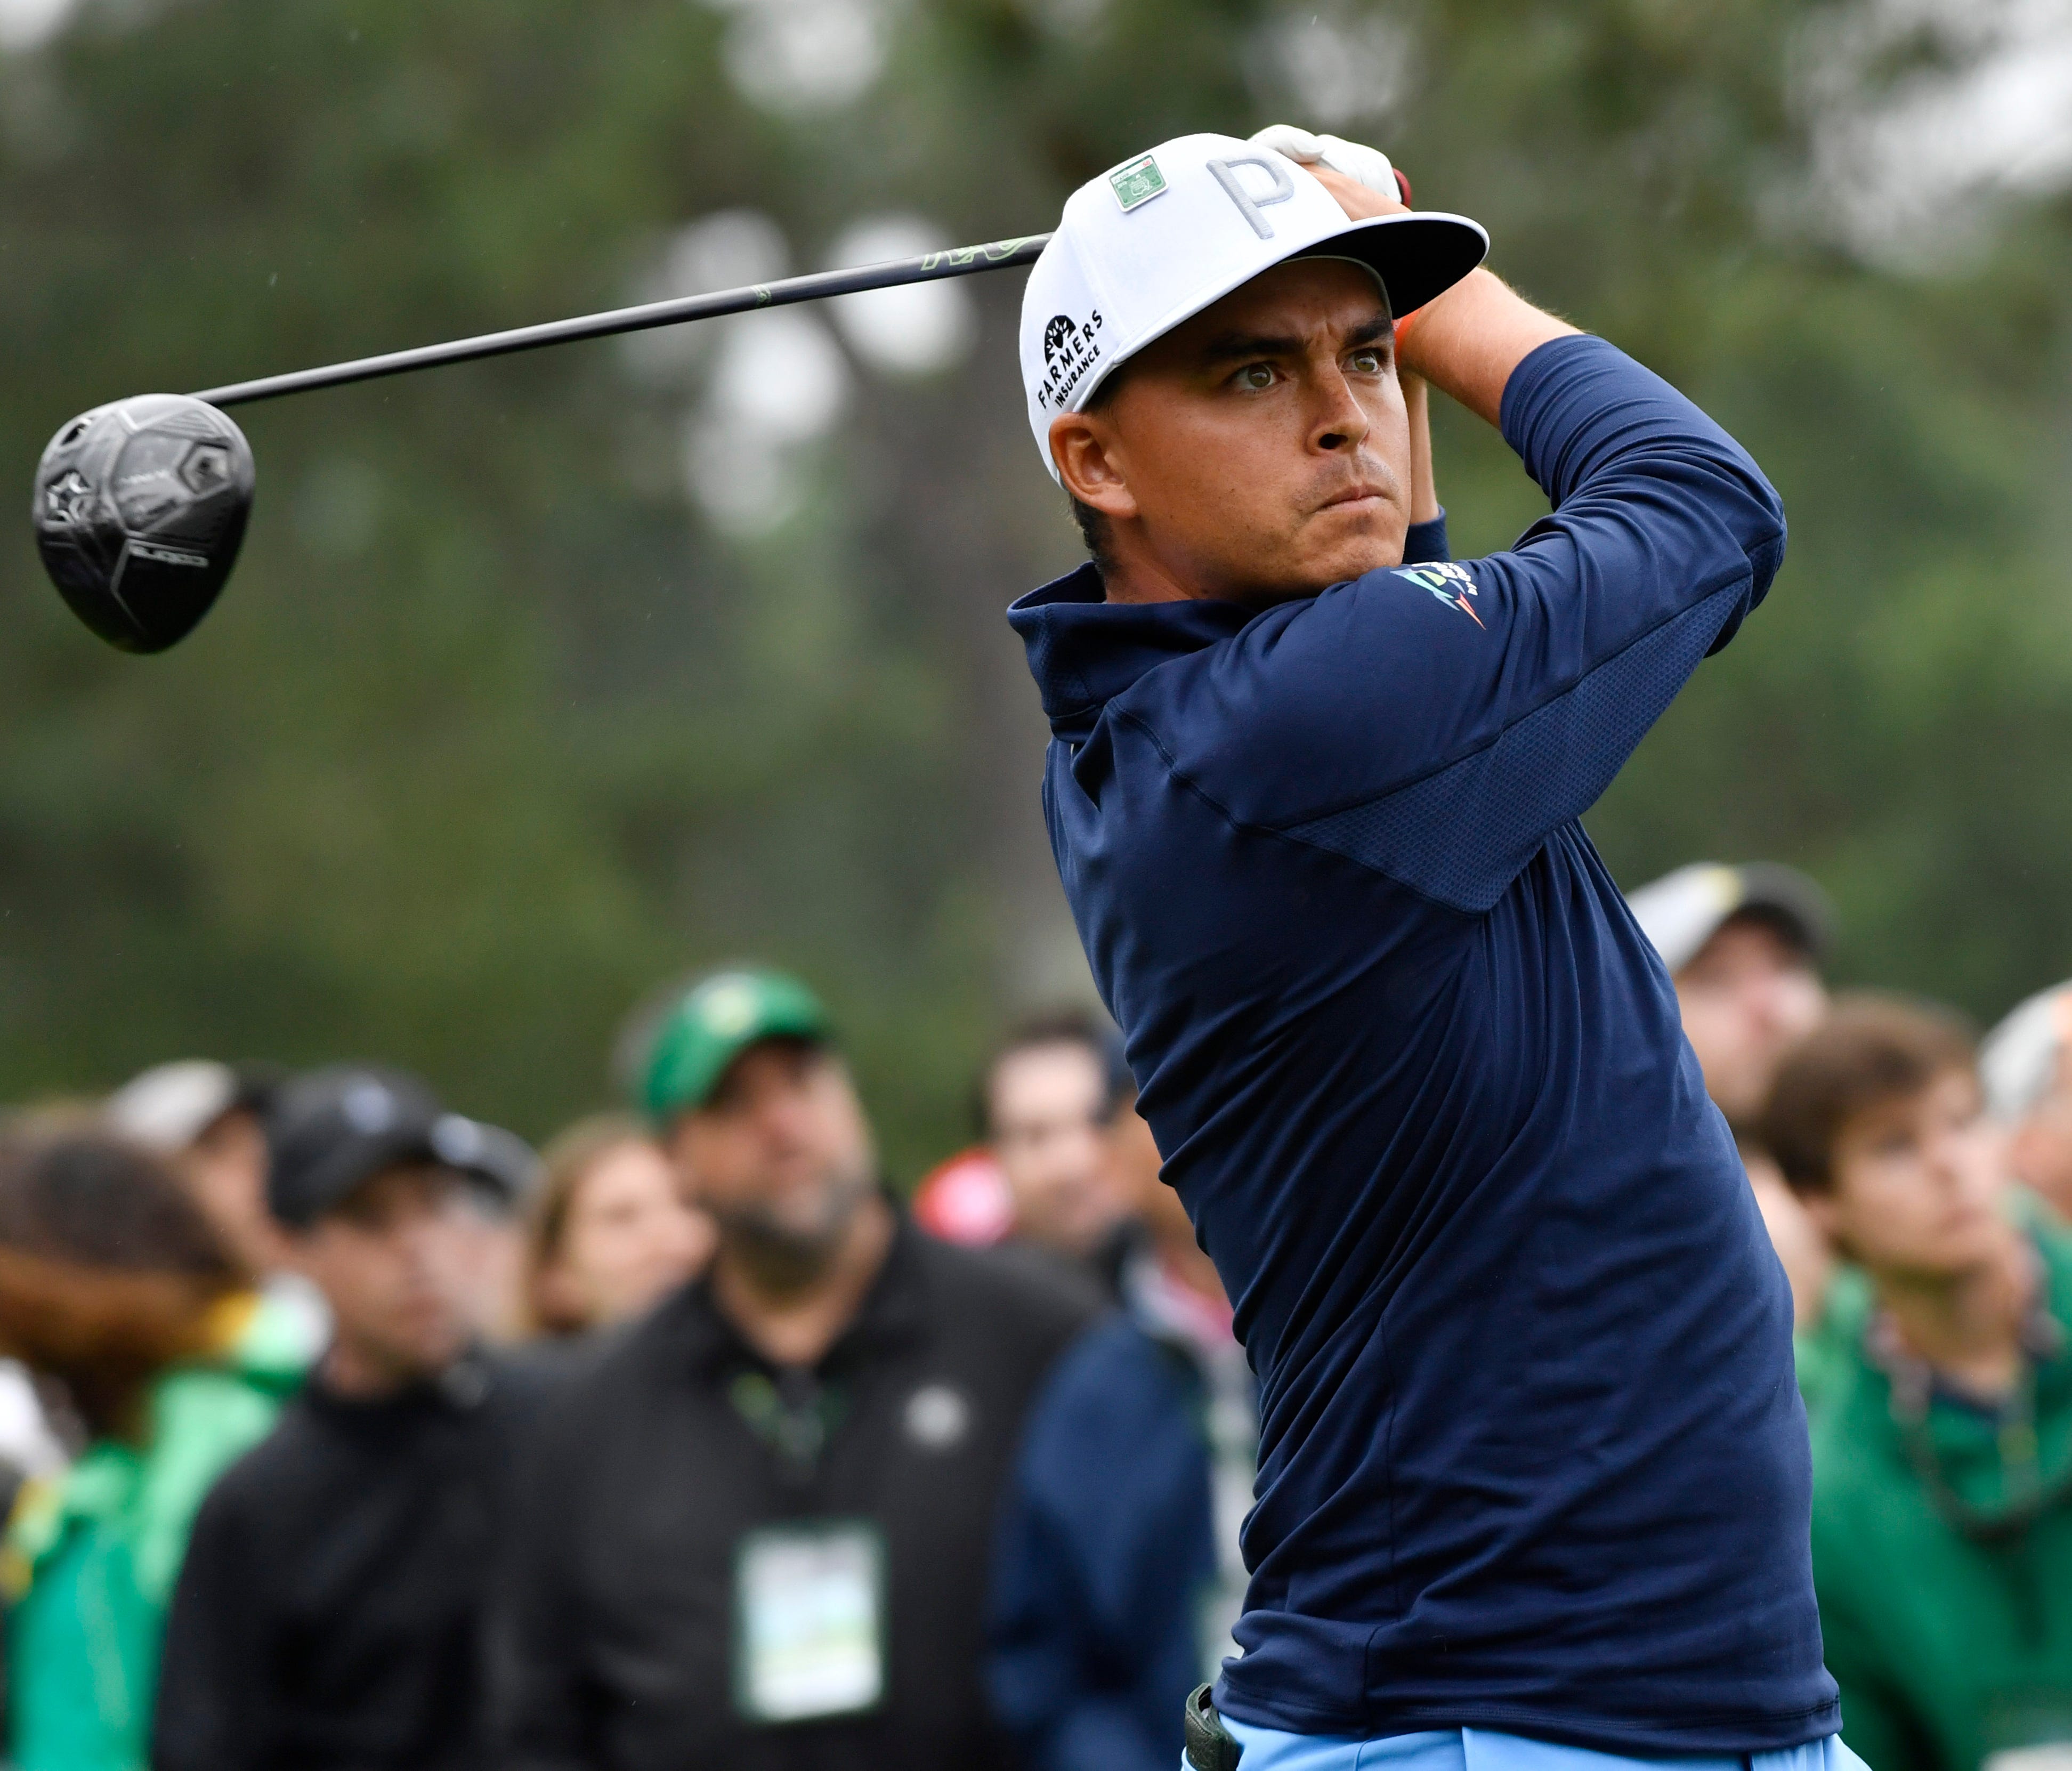 Rickie Fowler hits his tee shot on the 18th hole during the third round of the Masters golf tournament at Augusta National Golf Club.